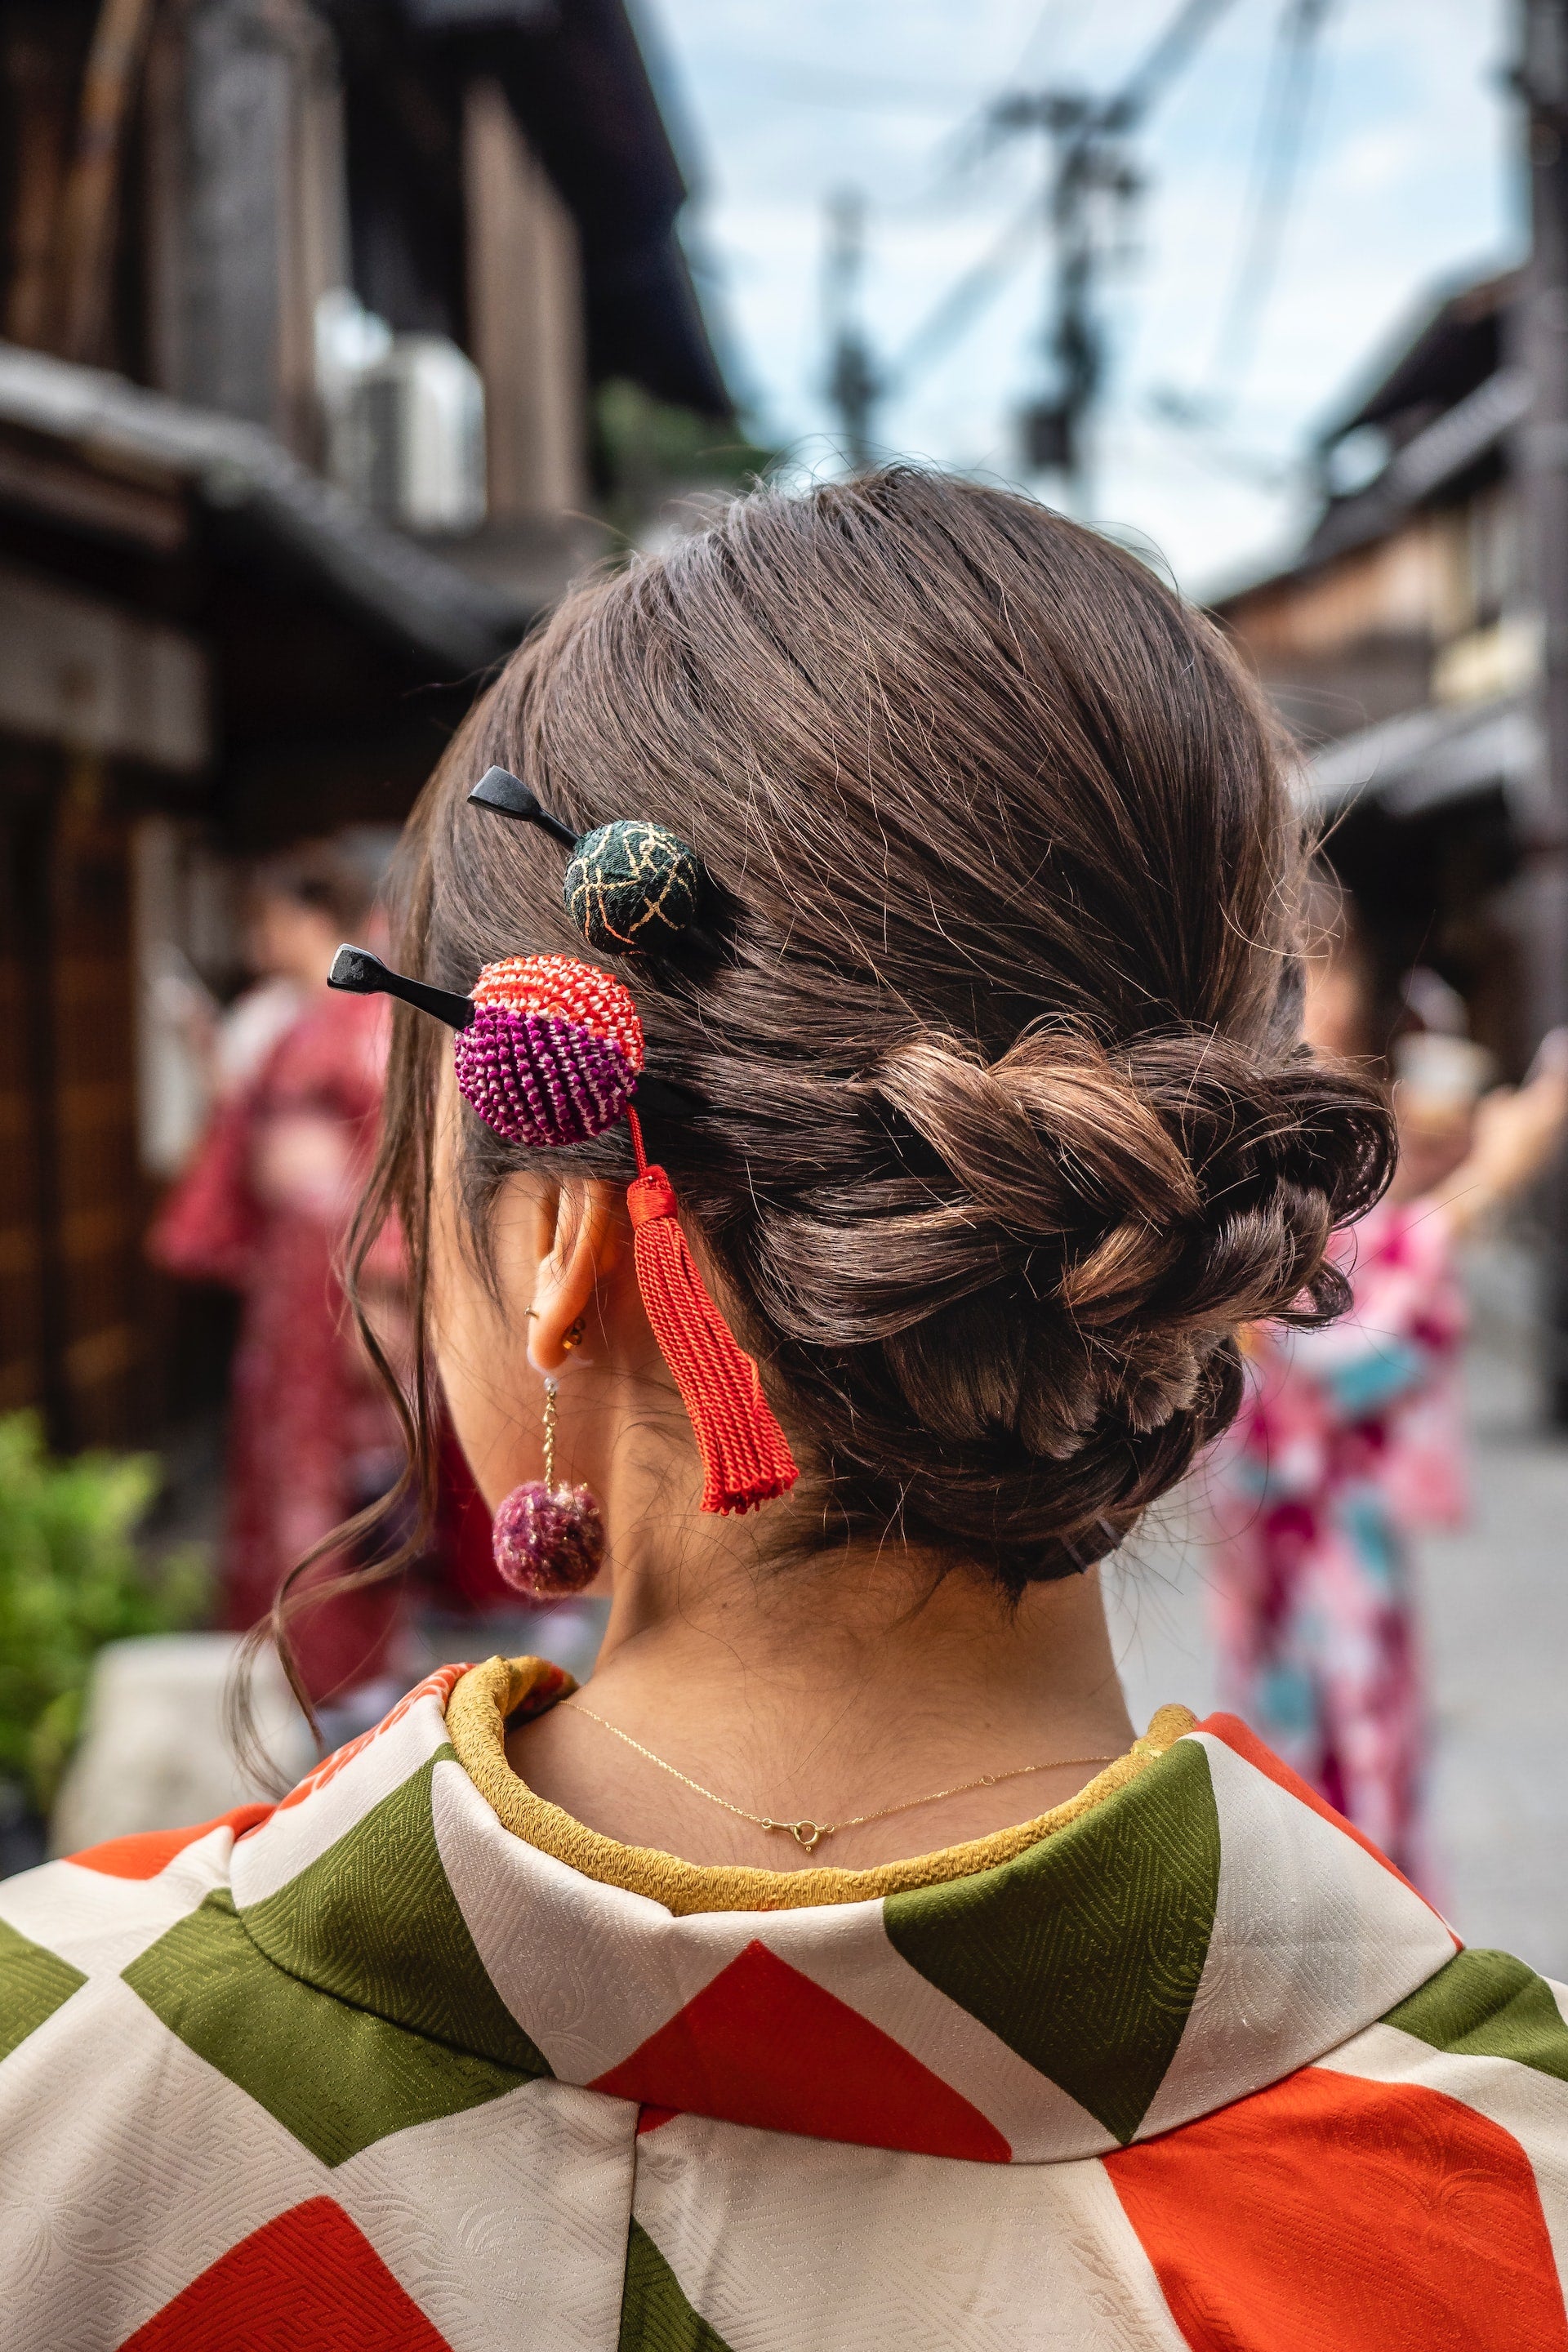 Top 10 Hair Accessories for Women in 2023